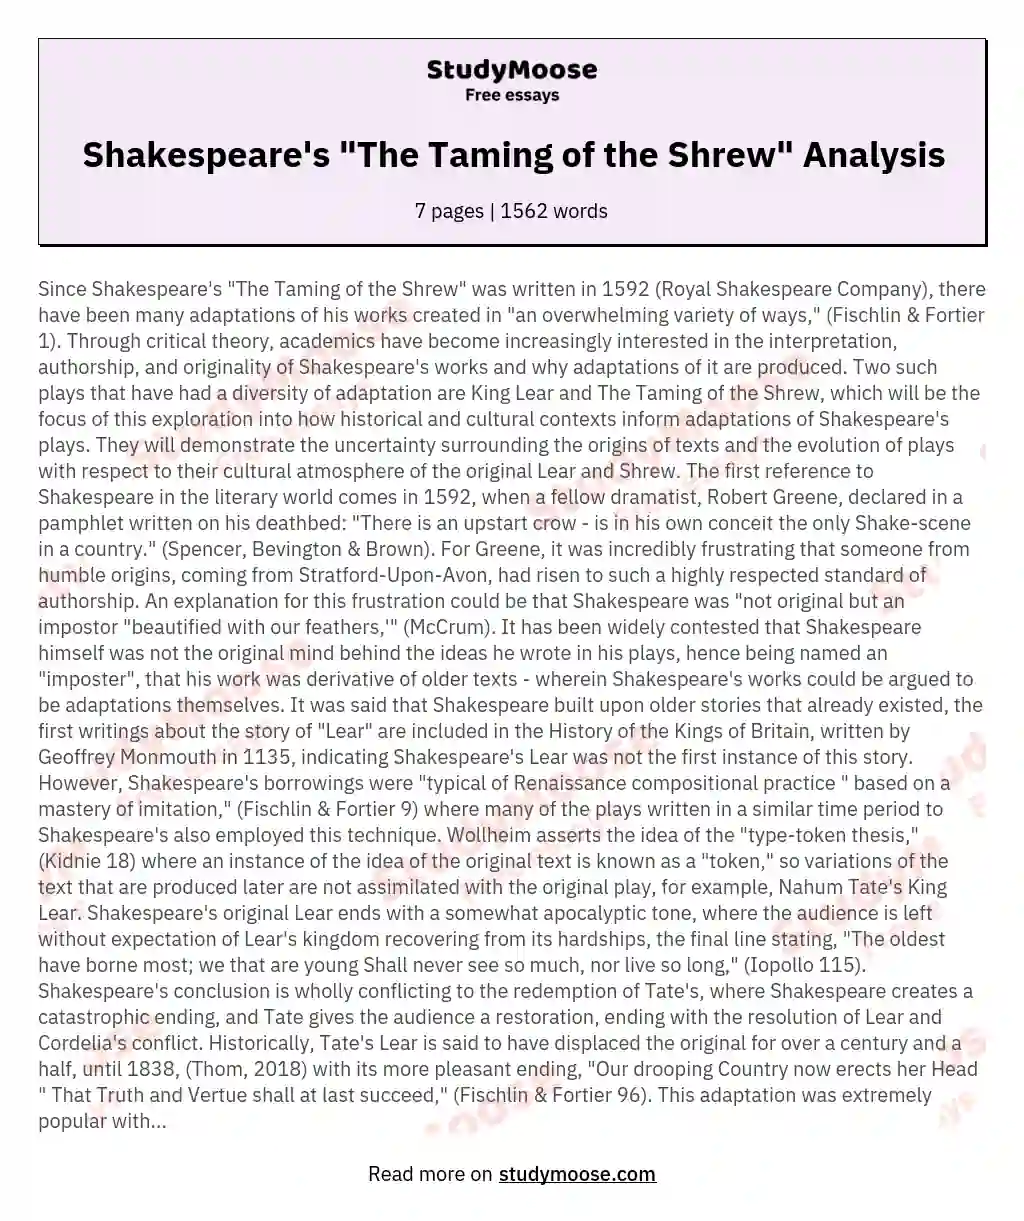 taming of the shrew essays